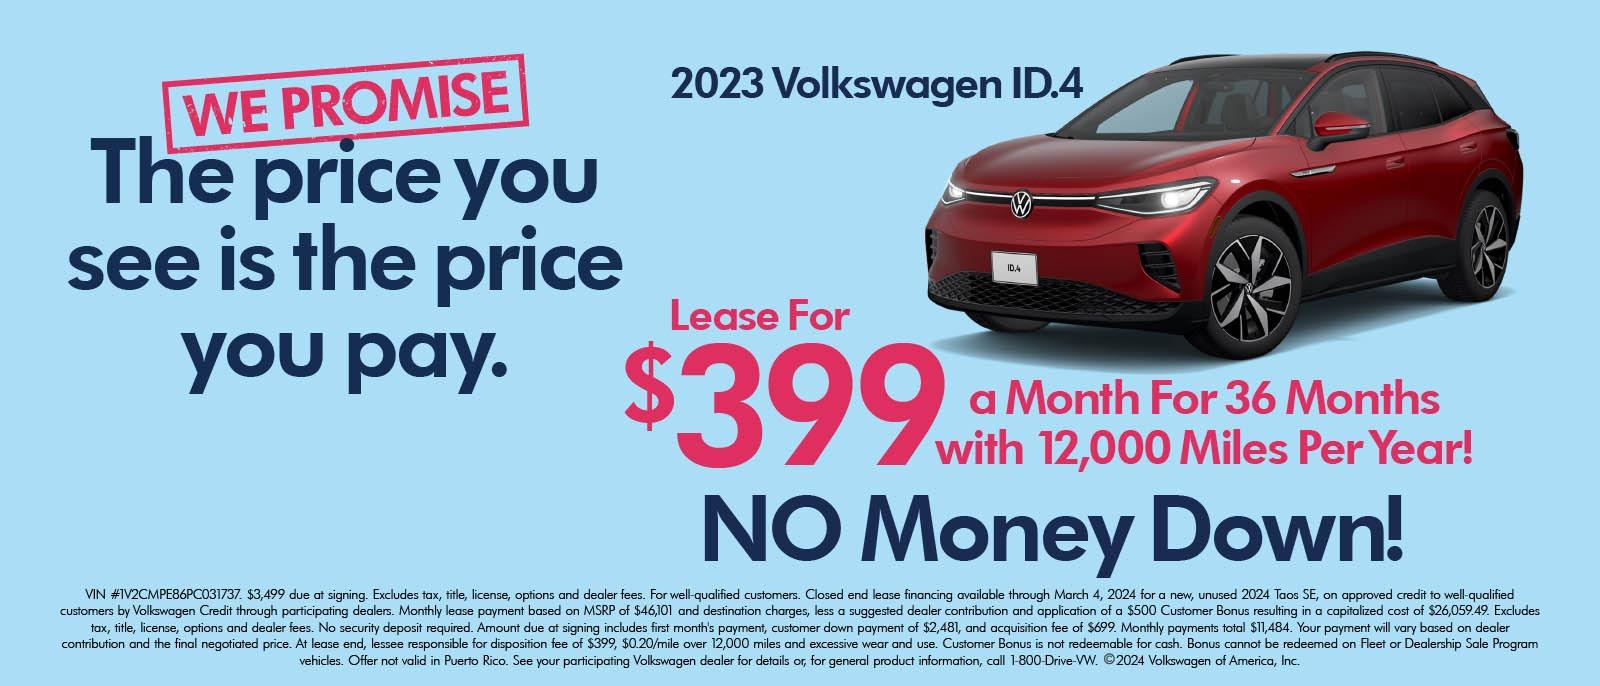 2023 Volkswagen ID.4
Lease for $399
a month for 36 Months
with 12,000 miles per year!
No money down